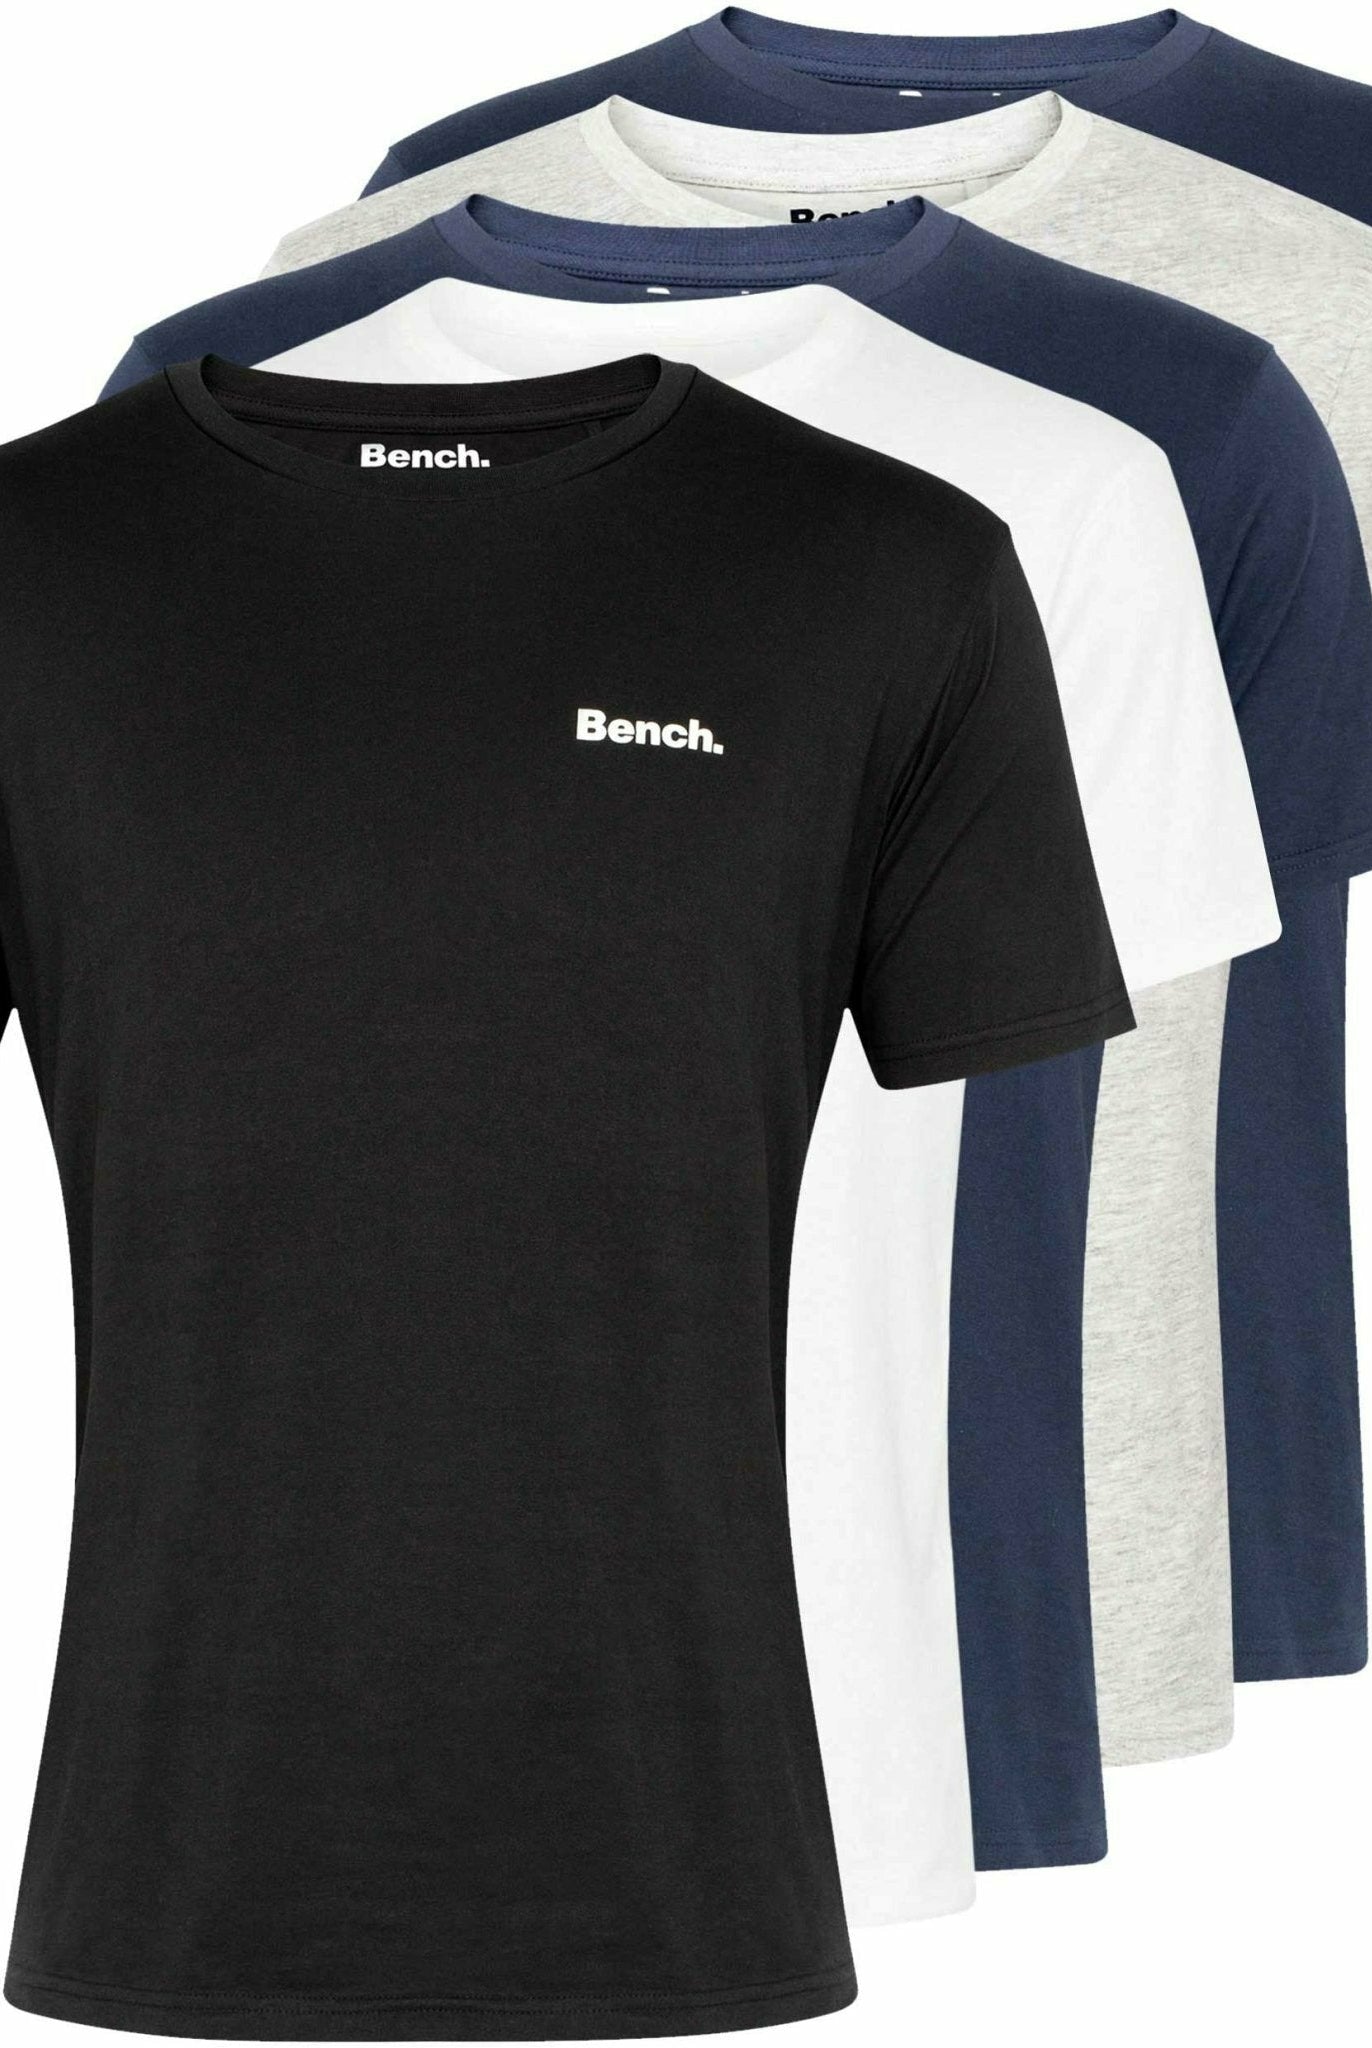 Mens 'JOSH' 5 Pack T-Shirts - ASSORTED - Shop at www.Bench.co.uk #LoveMyHood